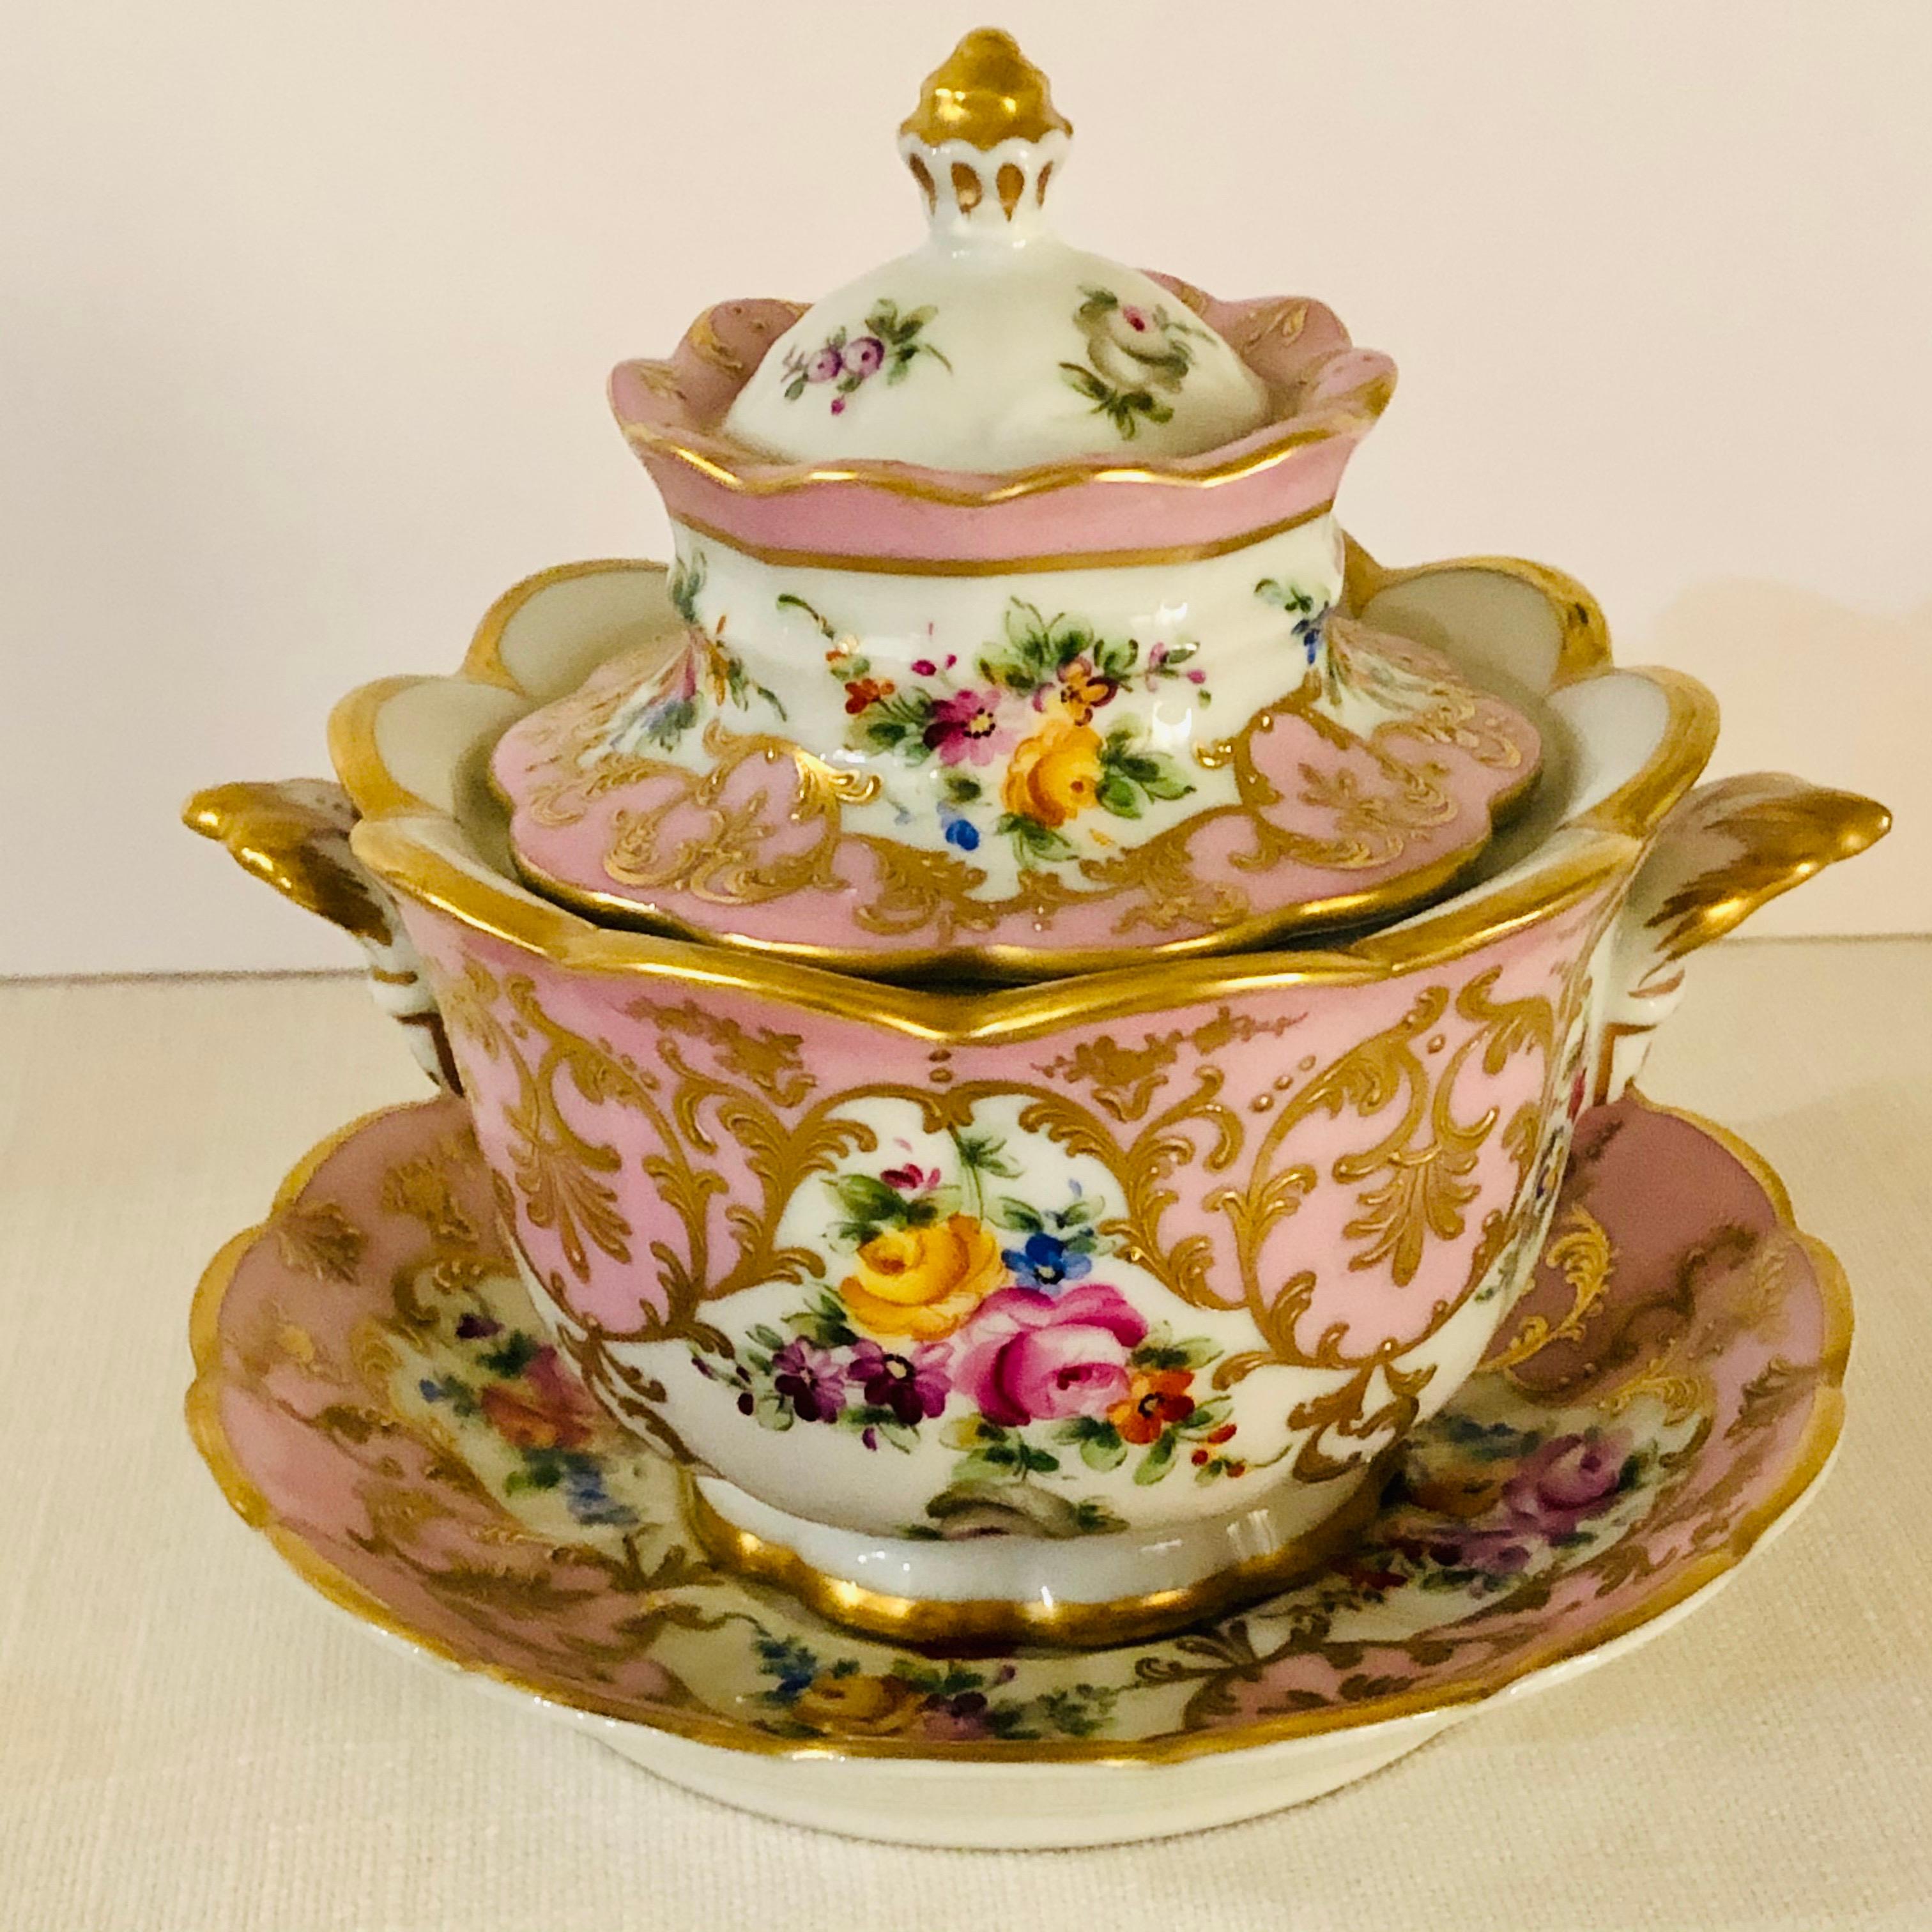 Hand-Painted Le Tallec Pink Covered Bowl with Flower Bouquets & Raised Gold Embellishments